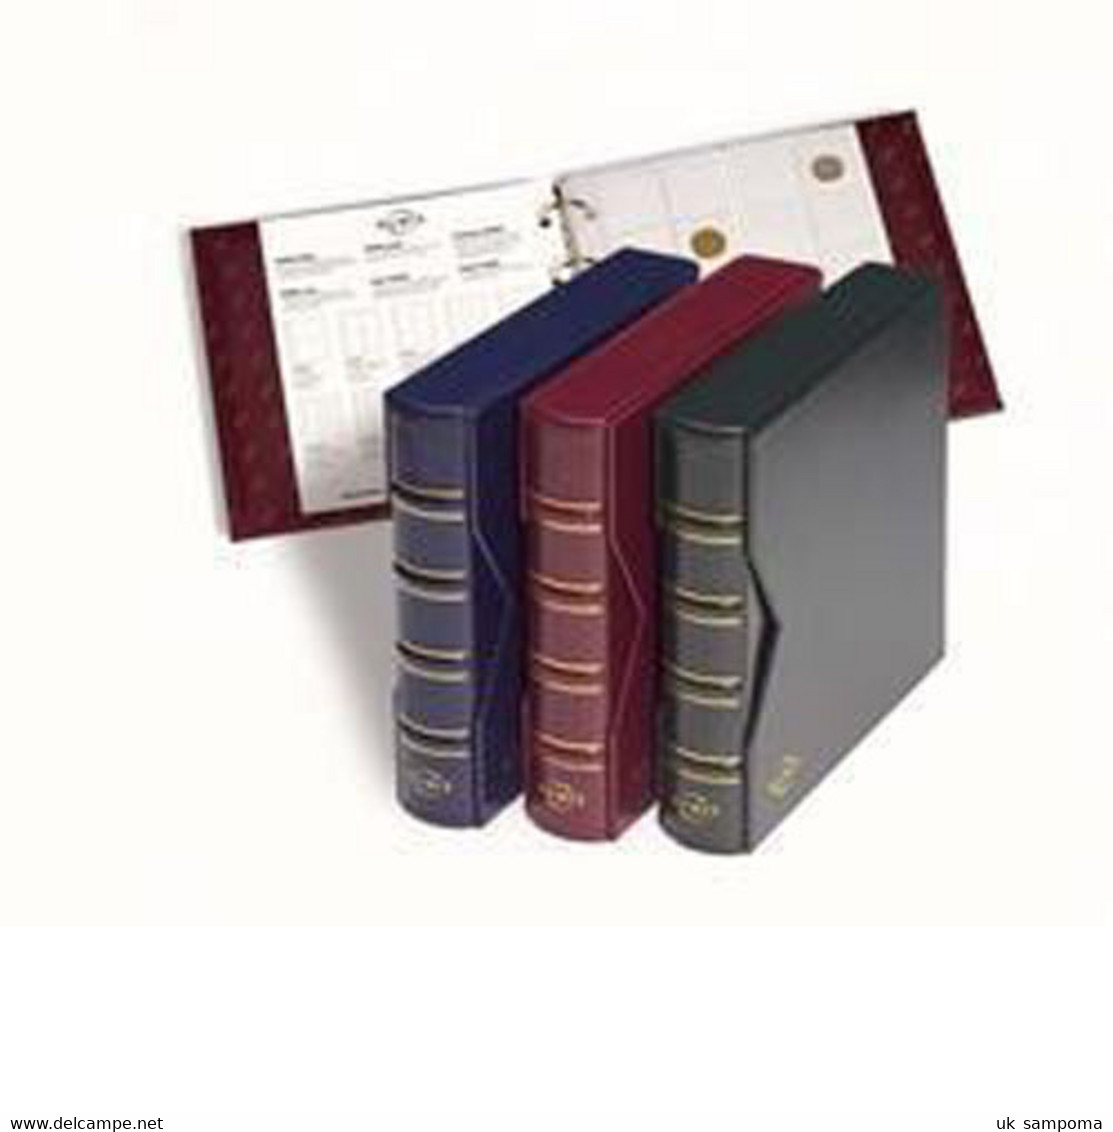 Ringbinder NUMIS, In Classic Design With Slipcase, Blue - Grand Format, Fond Noir